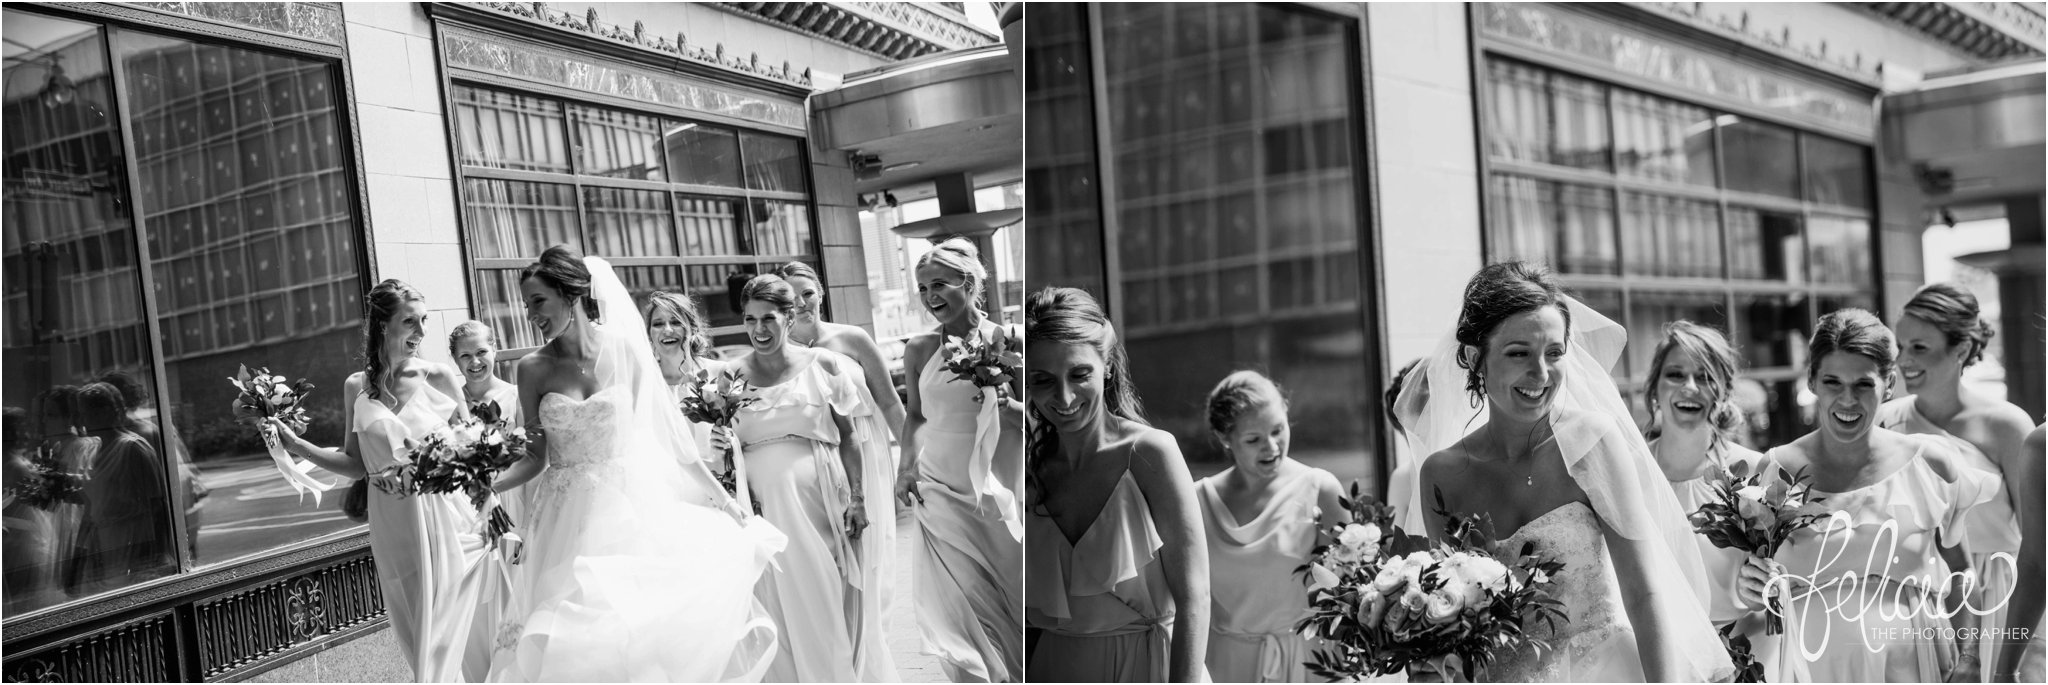 Grace and Holy Trinity Cathedral Wedding Photos | Kansas City | Candid Black and White Bridal Party | Images by www.feliciathephotographer.com